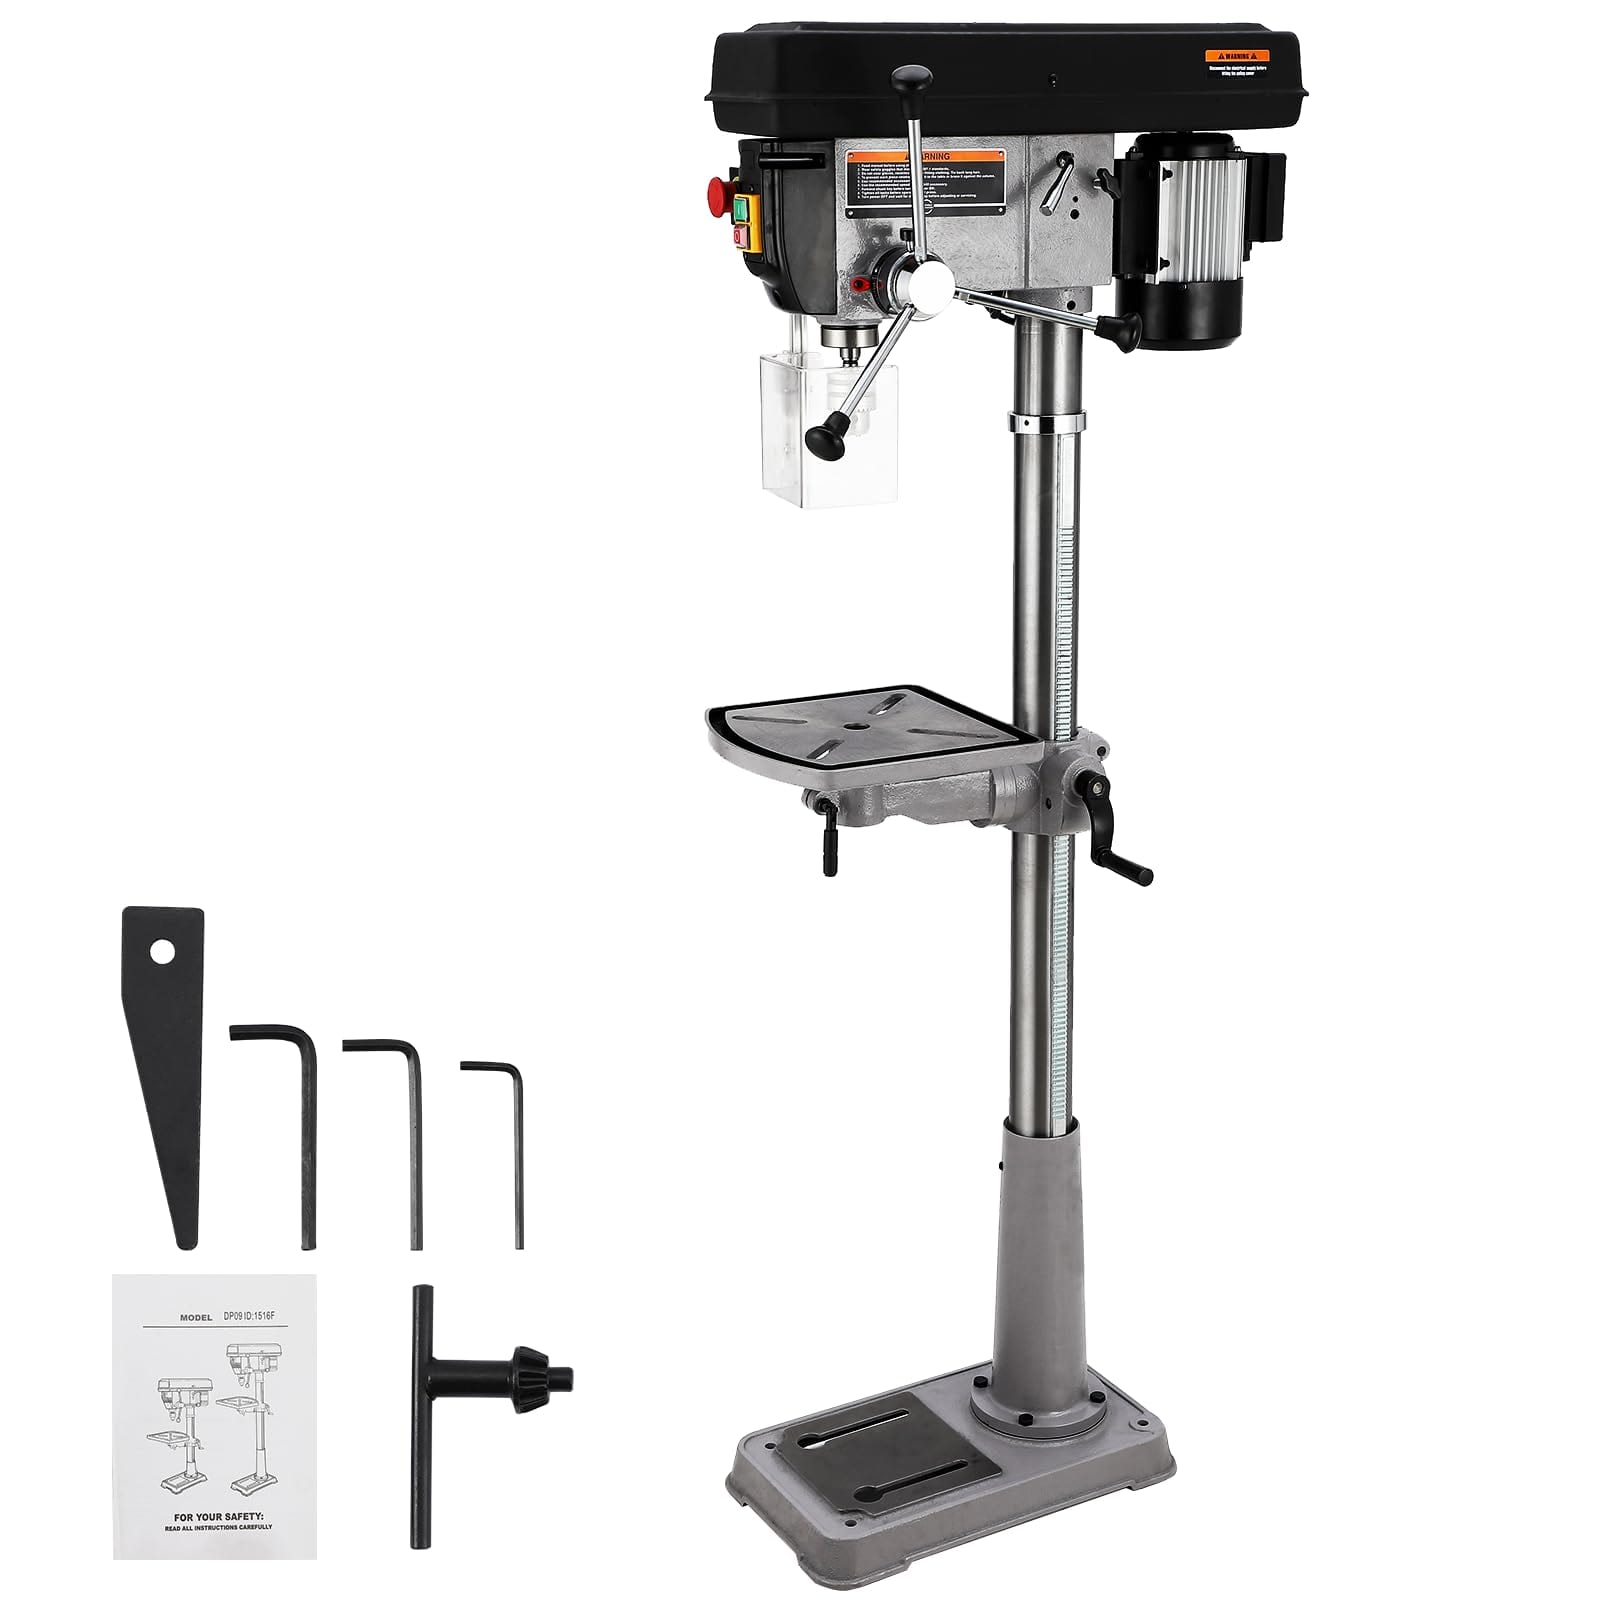 15 Inch Floor Drill Press, 7.5 Amp 120V with Safety Guard